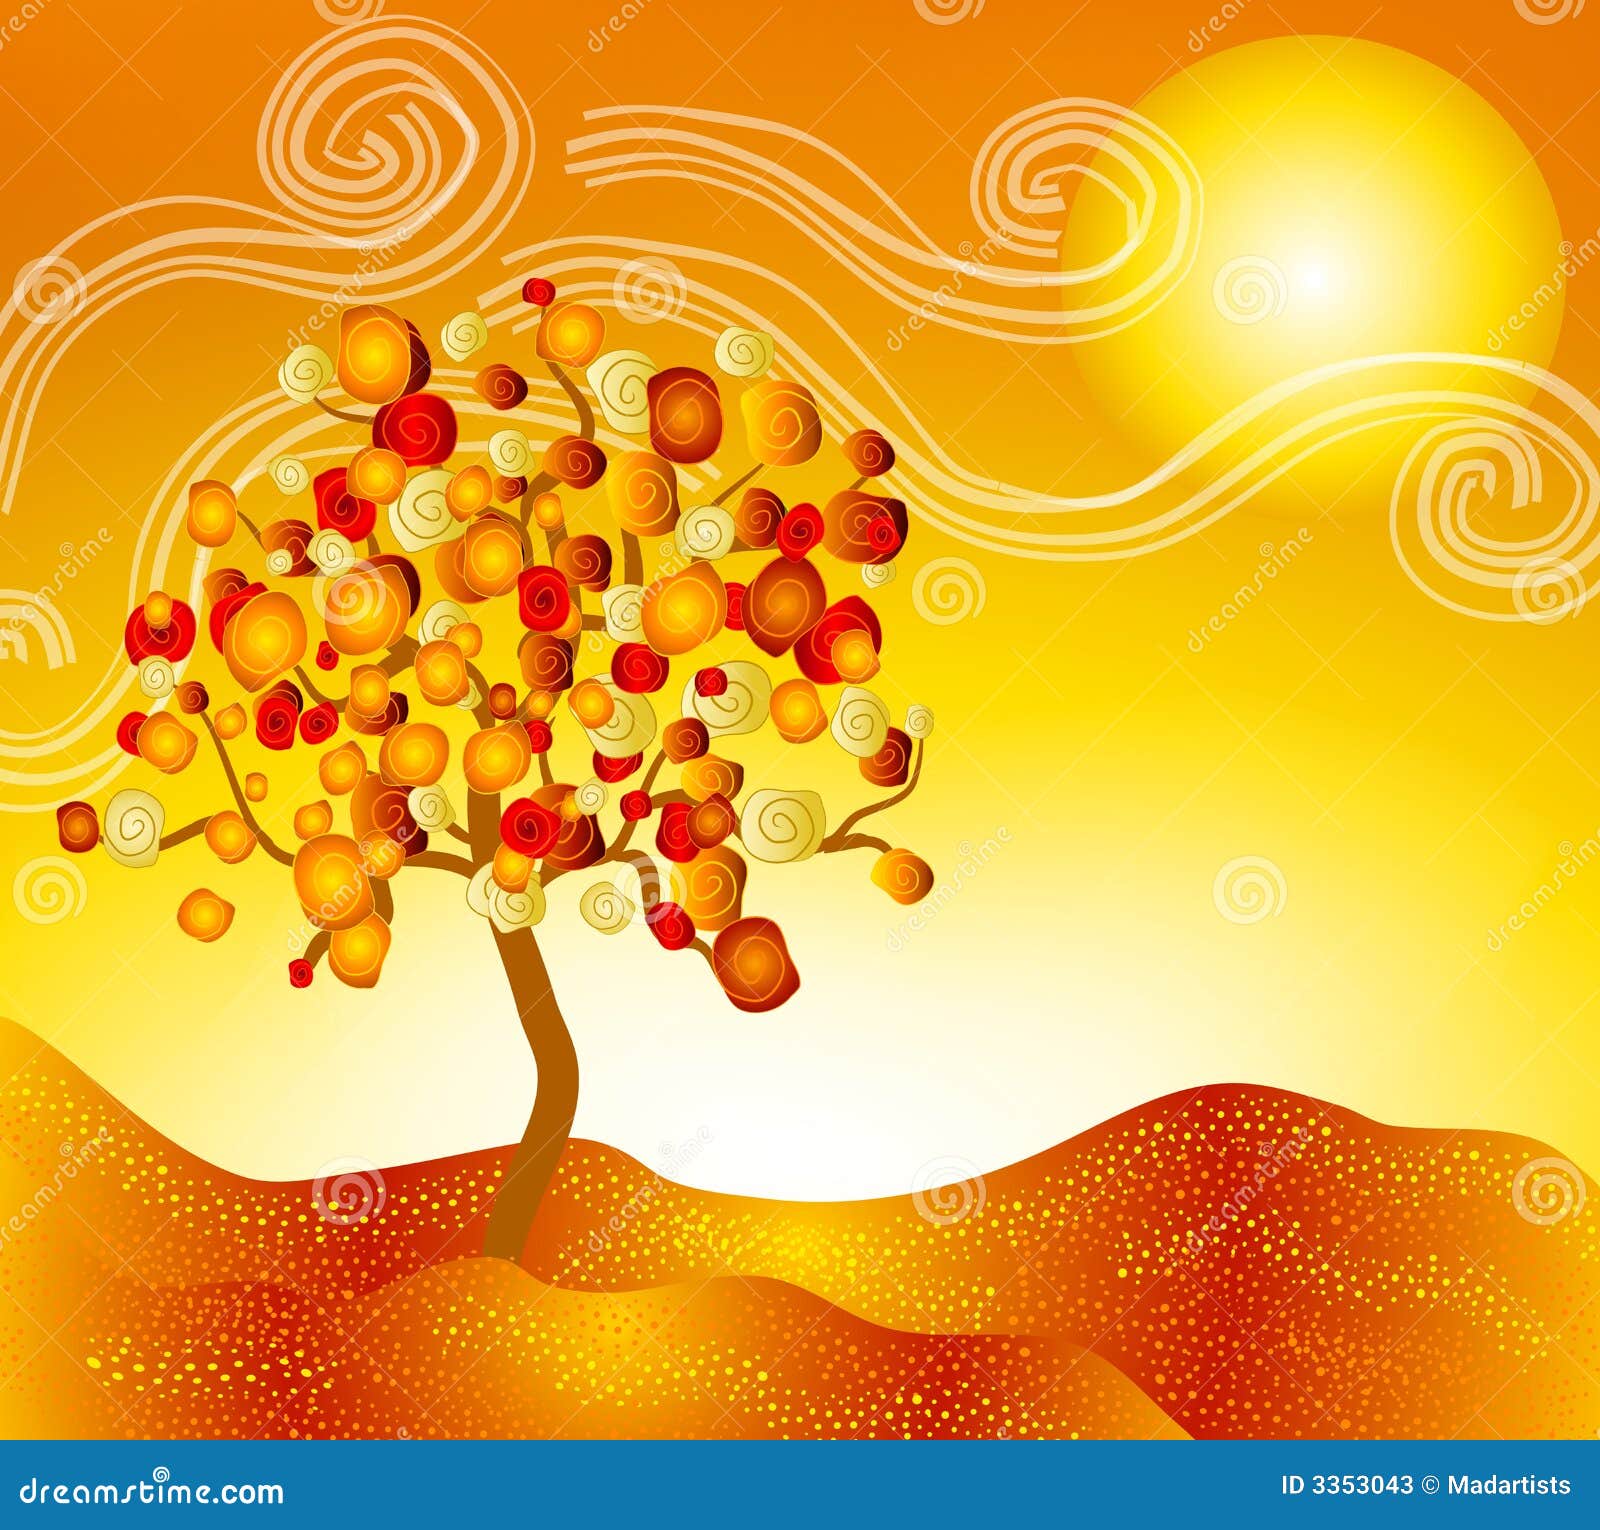 free clipart of fall scenes - photo #50